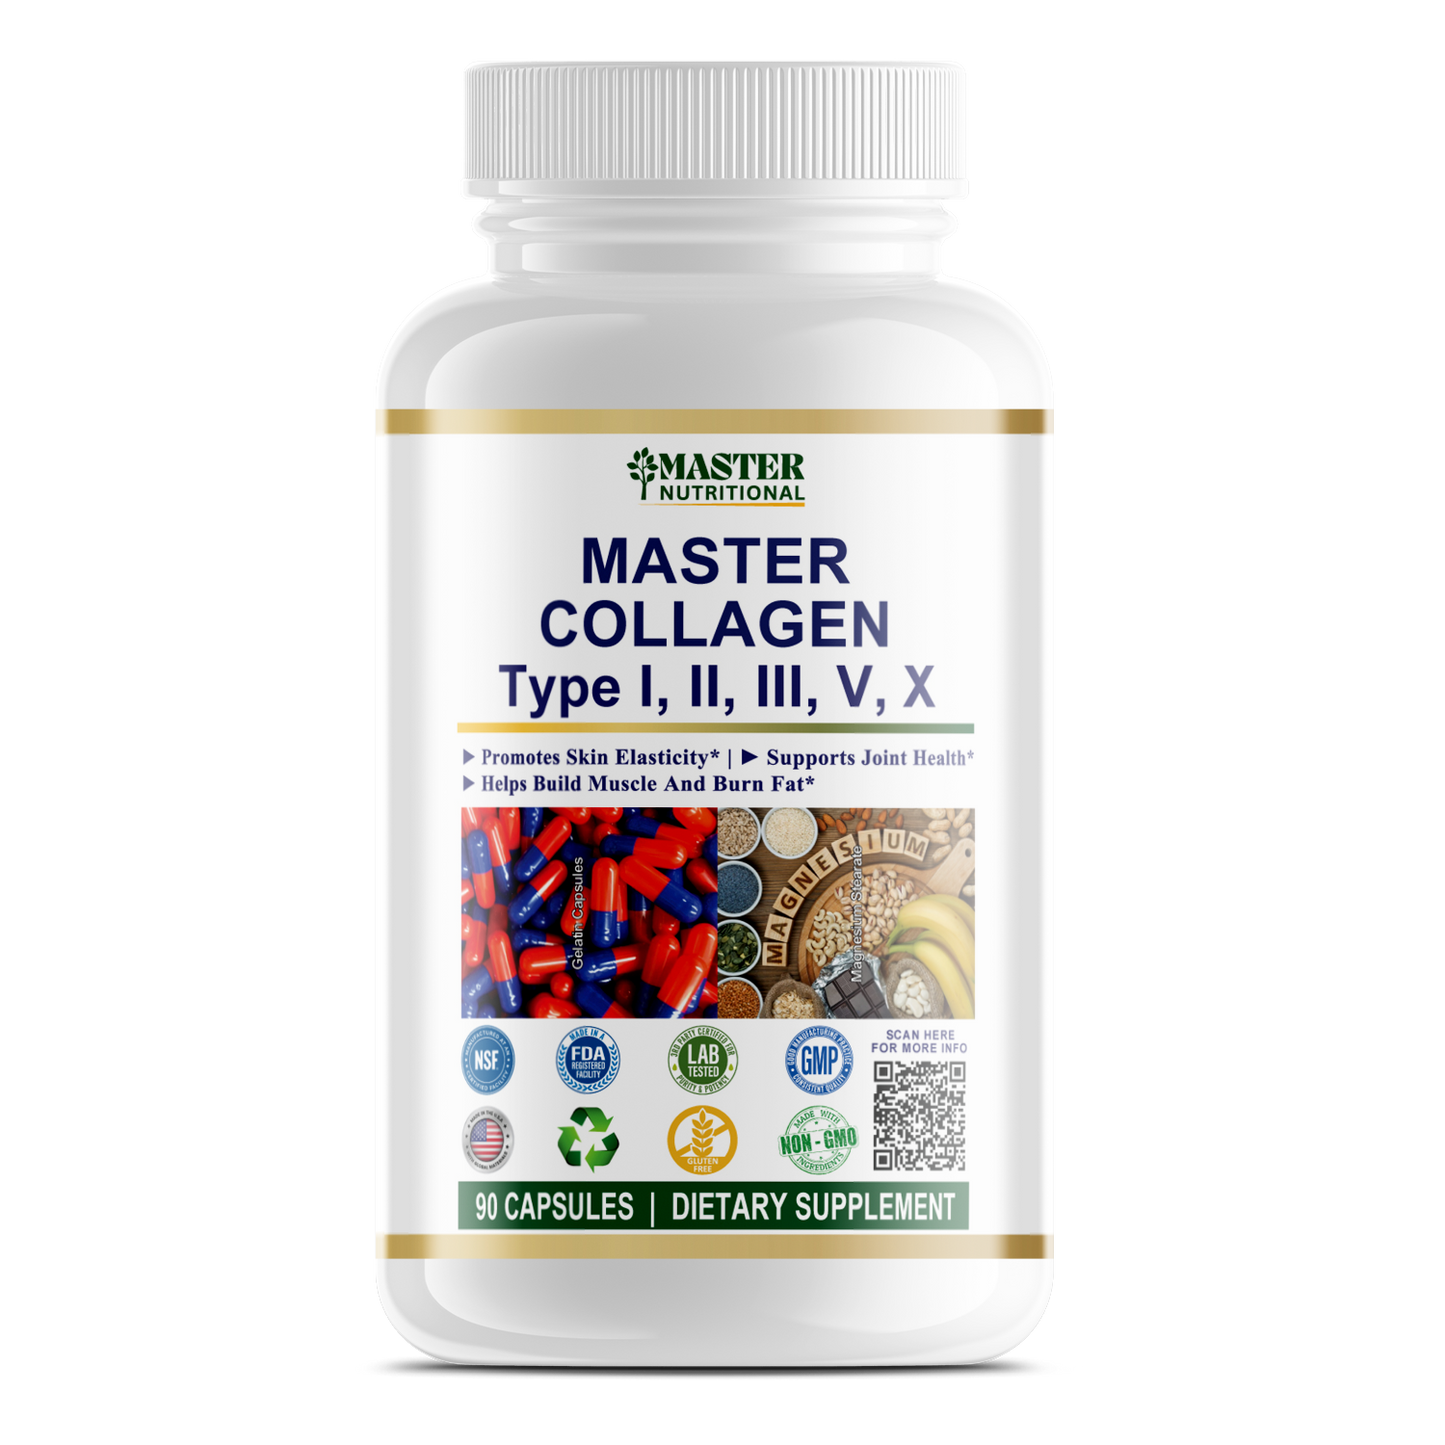 Master Collagen (Full Spectrum): Your Ultimate Joint Comfort and Skin Elasticity Formula